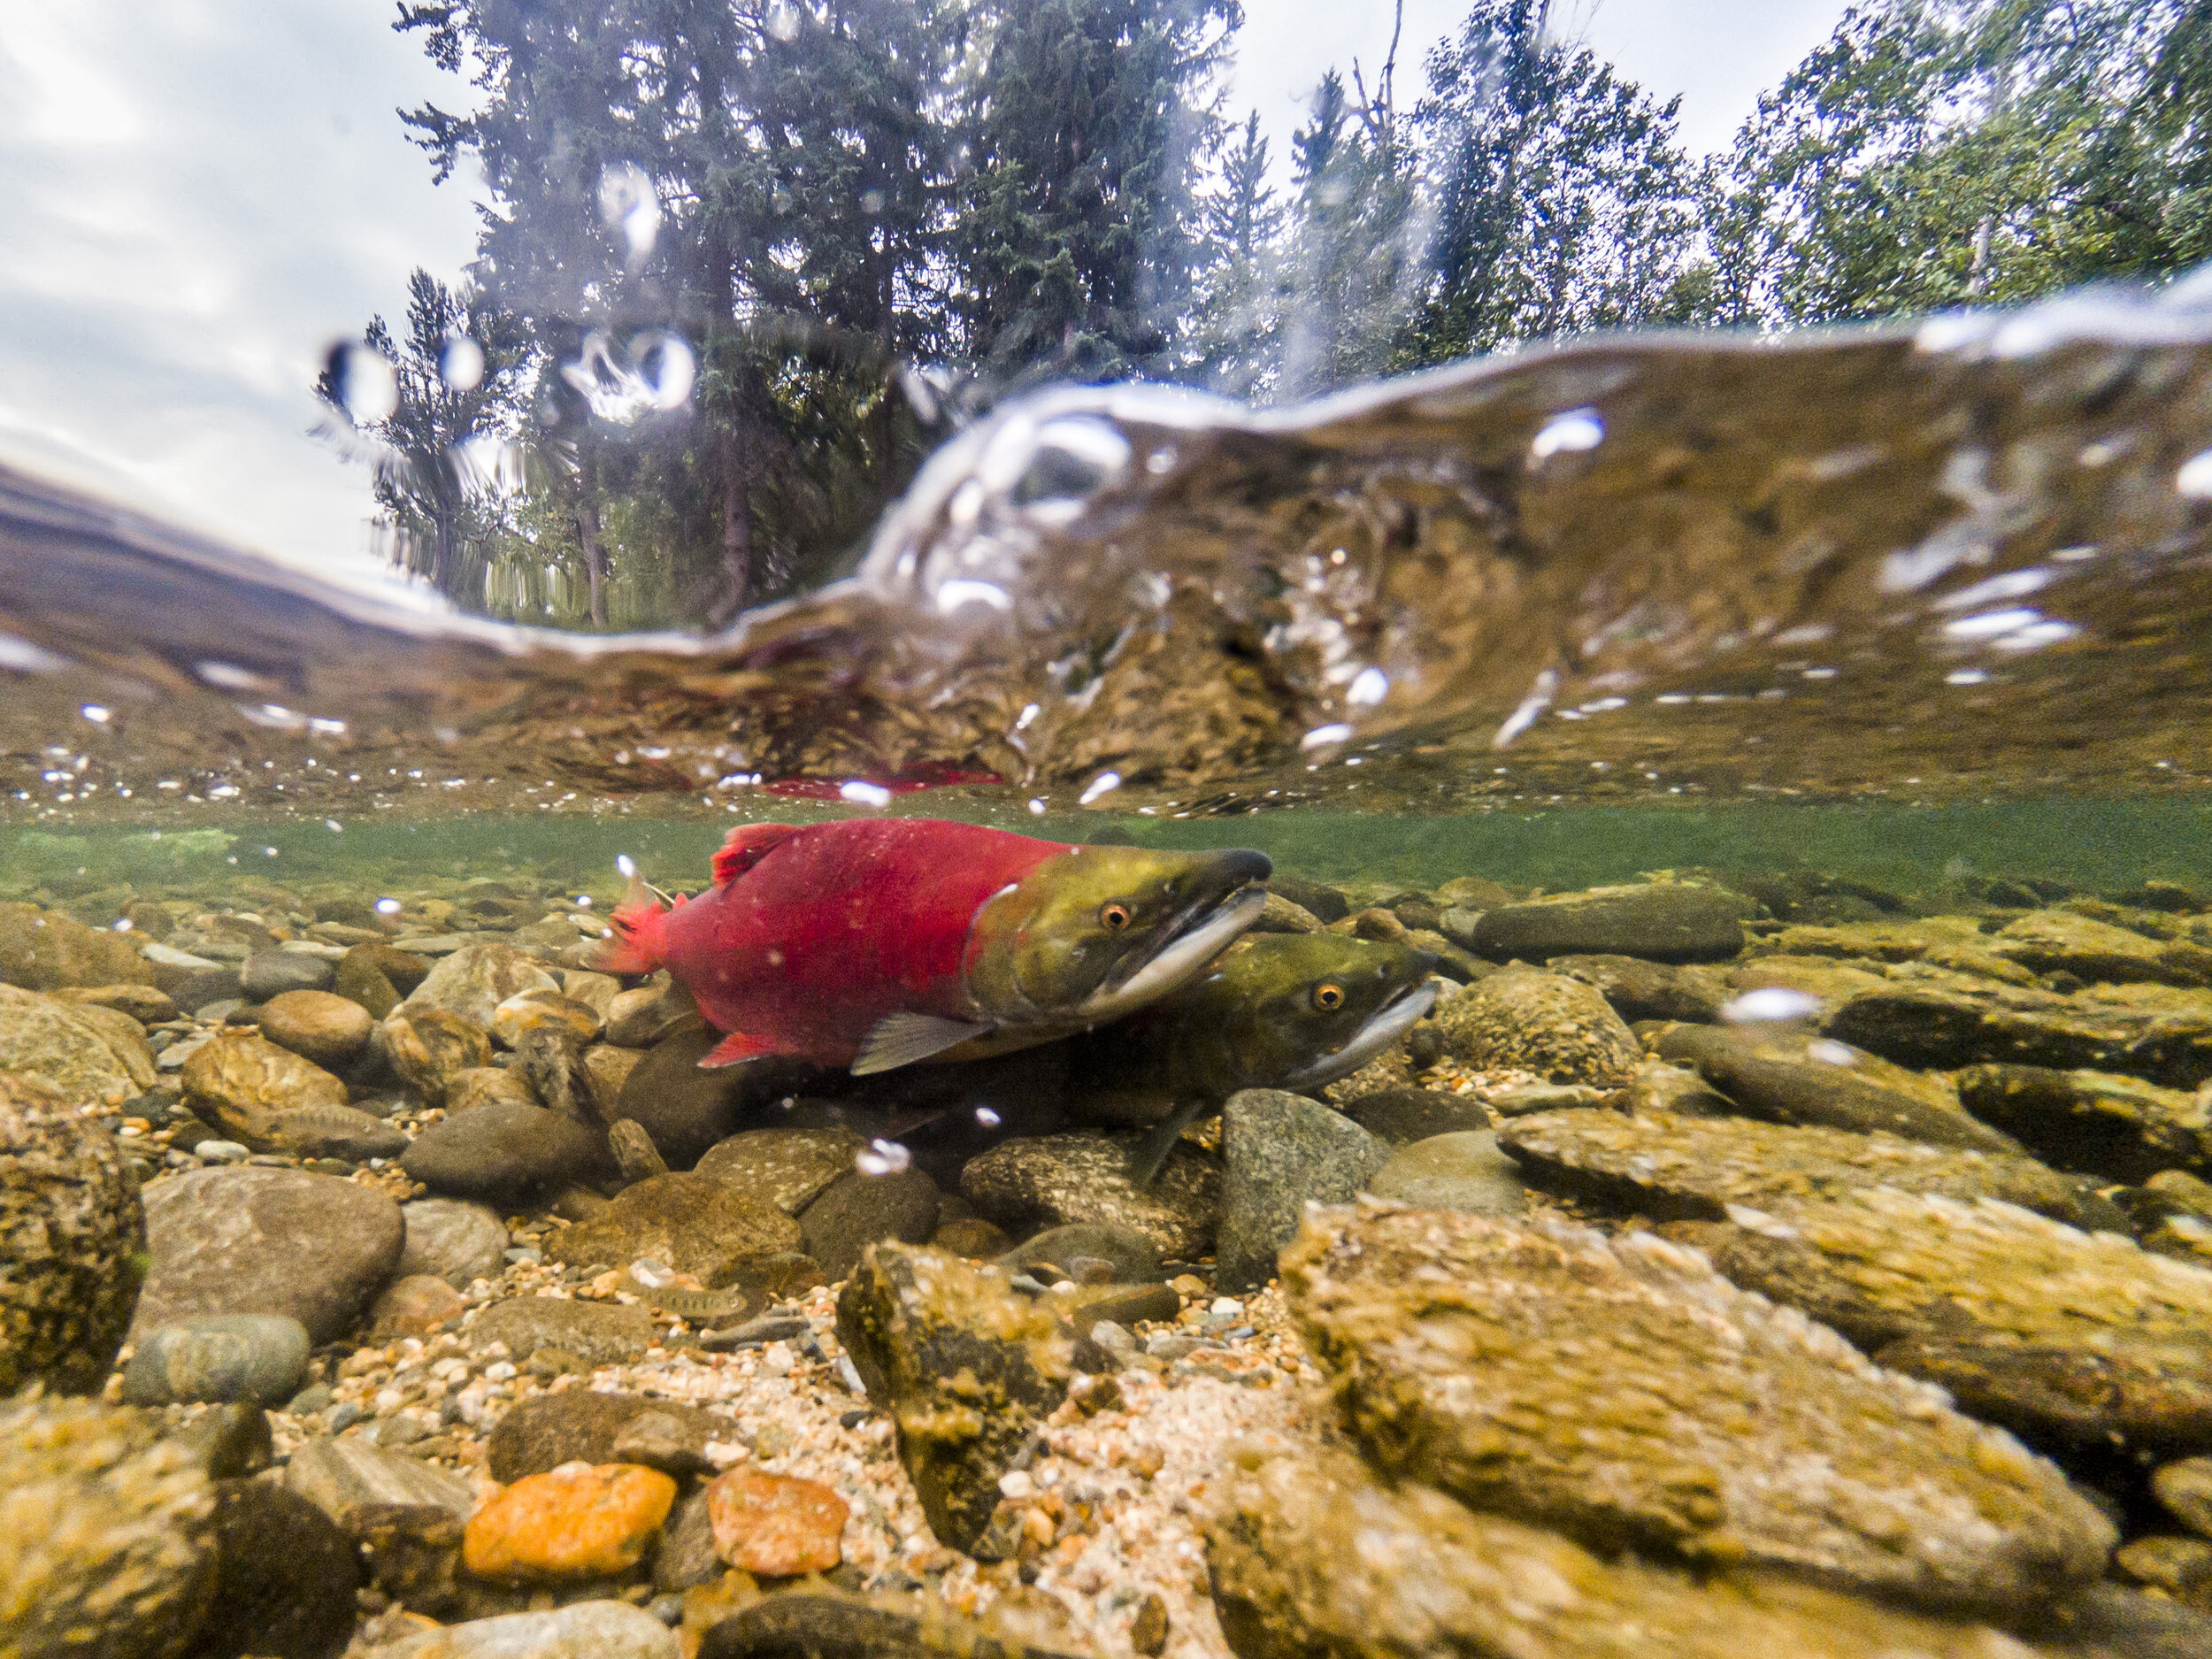  A male and female Sockeye salmon preparing to spawn in a small tributary of the Fraser River in the unceded traditional territory of the Secwepemc First Nation. 